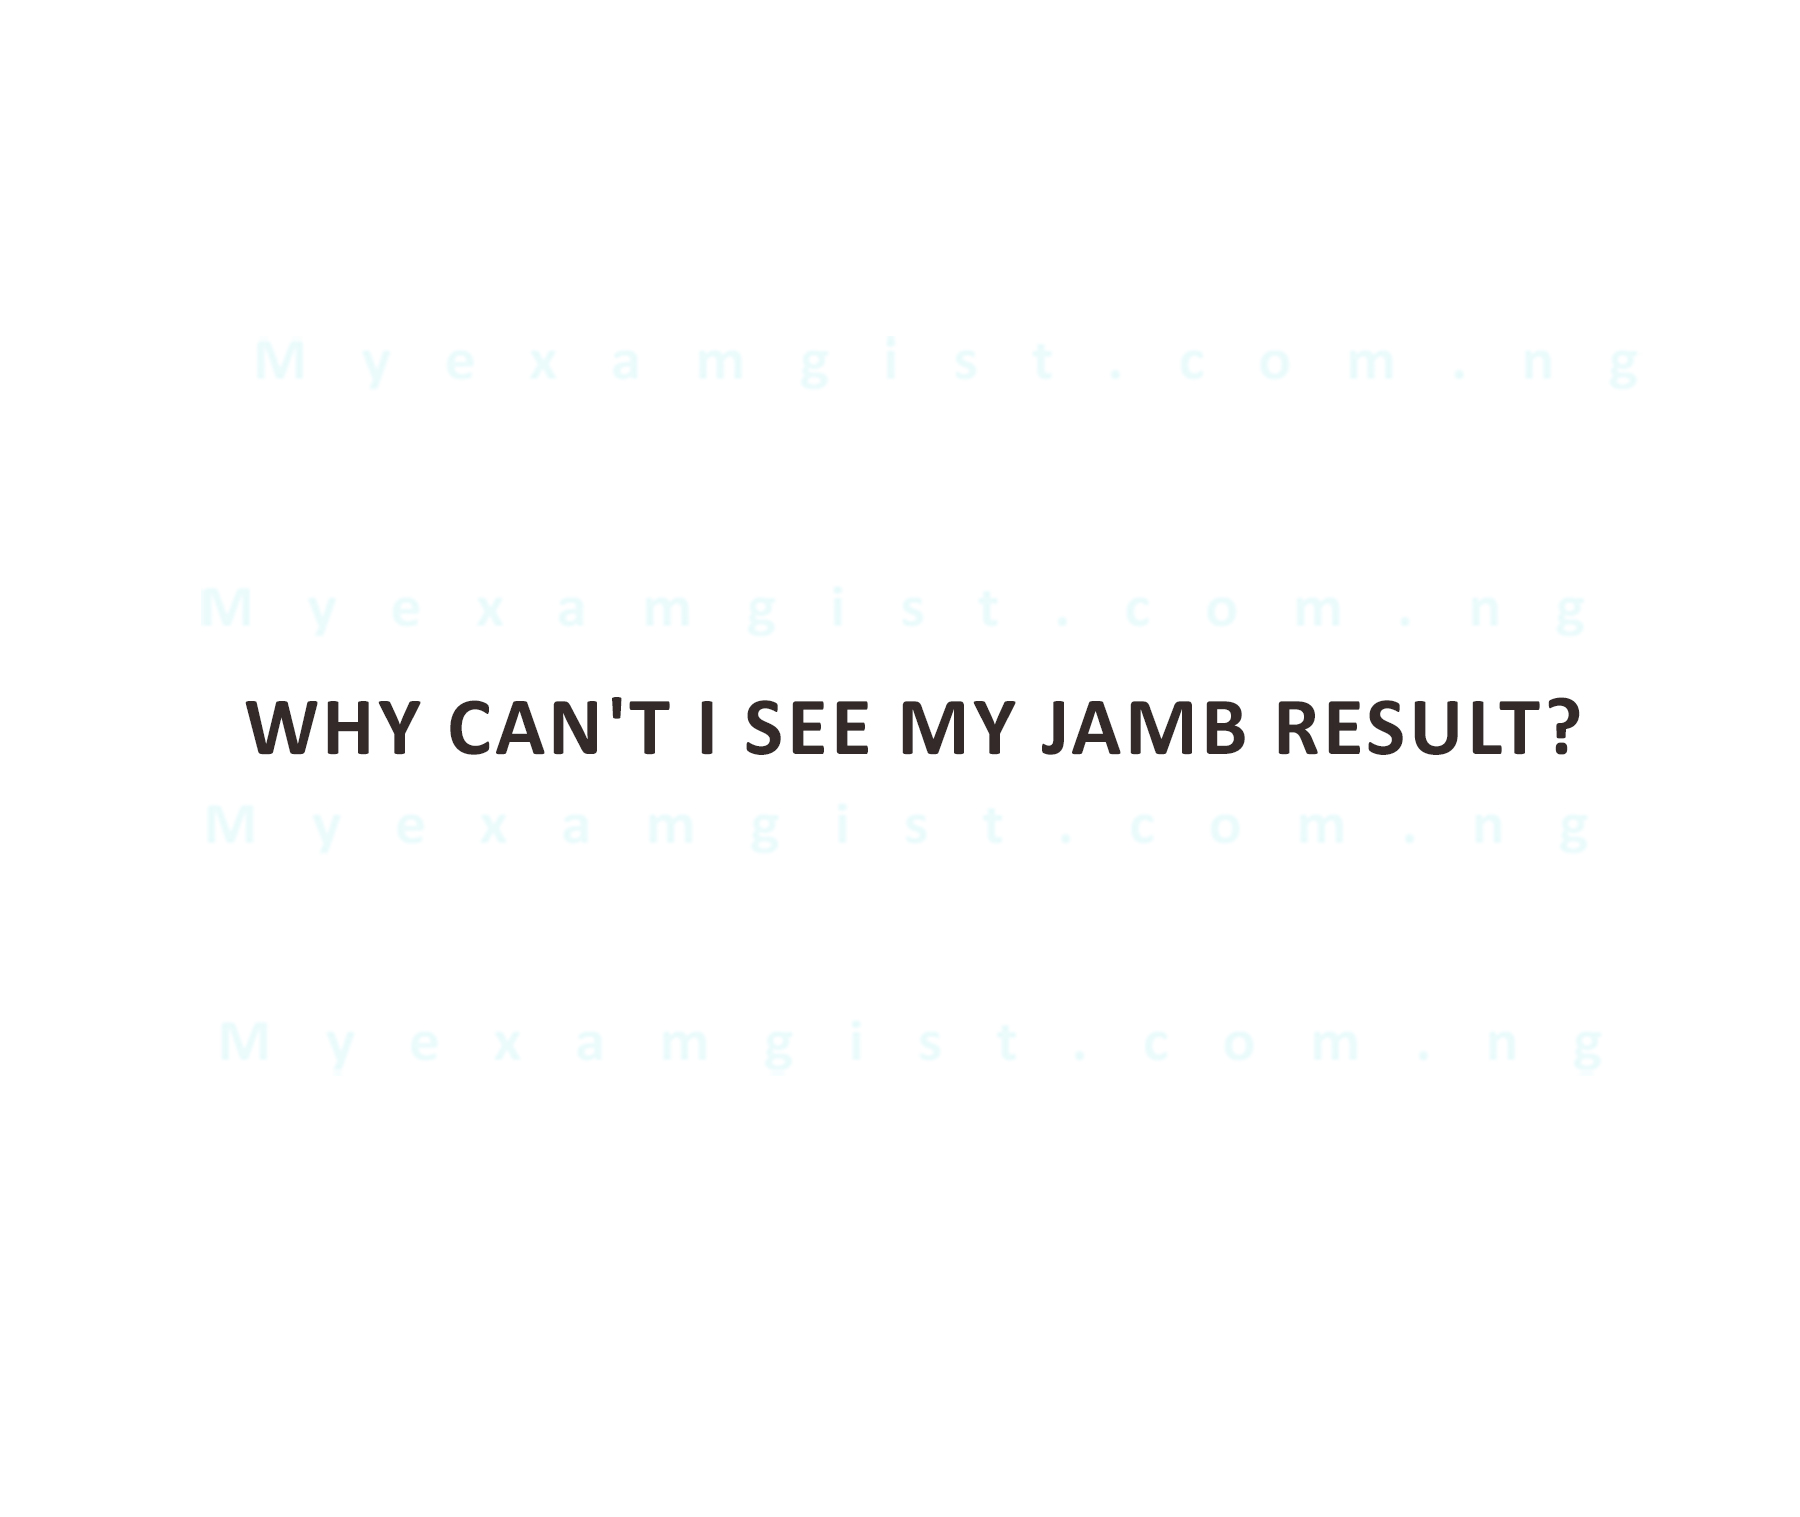 Why can't I see my JAMB result?